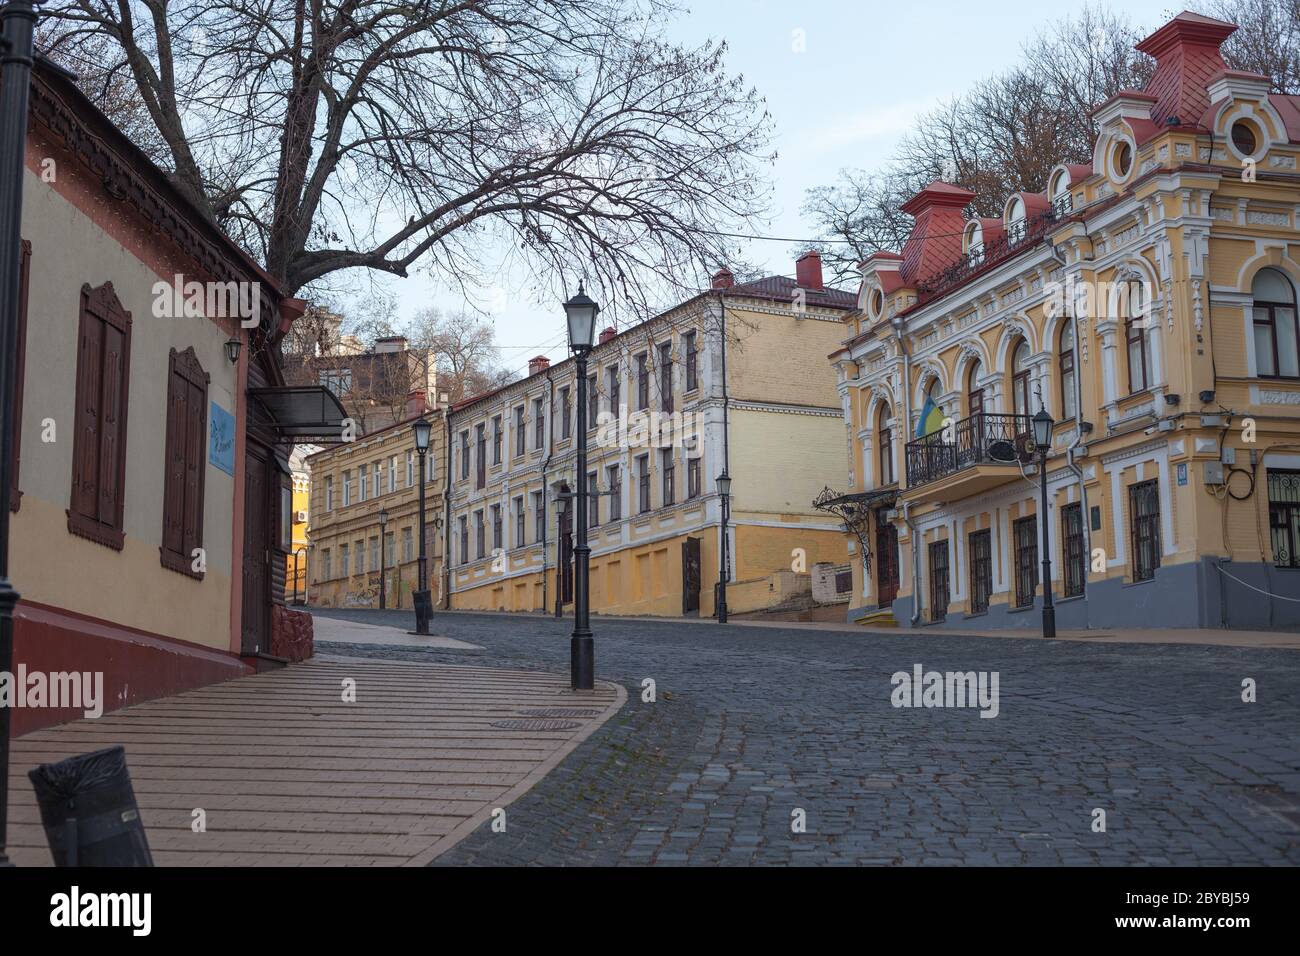 Kiev, Ukraine - March 26, 2020: Old architecture and cobblestone road on St. Andrew's Descent in the center of Kiev. Stock Photo